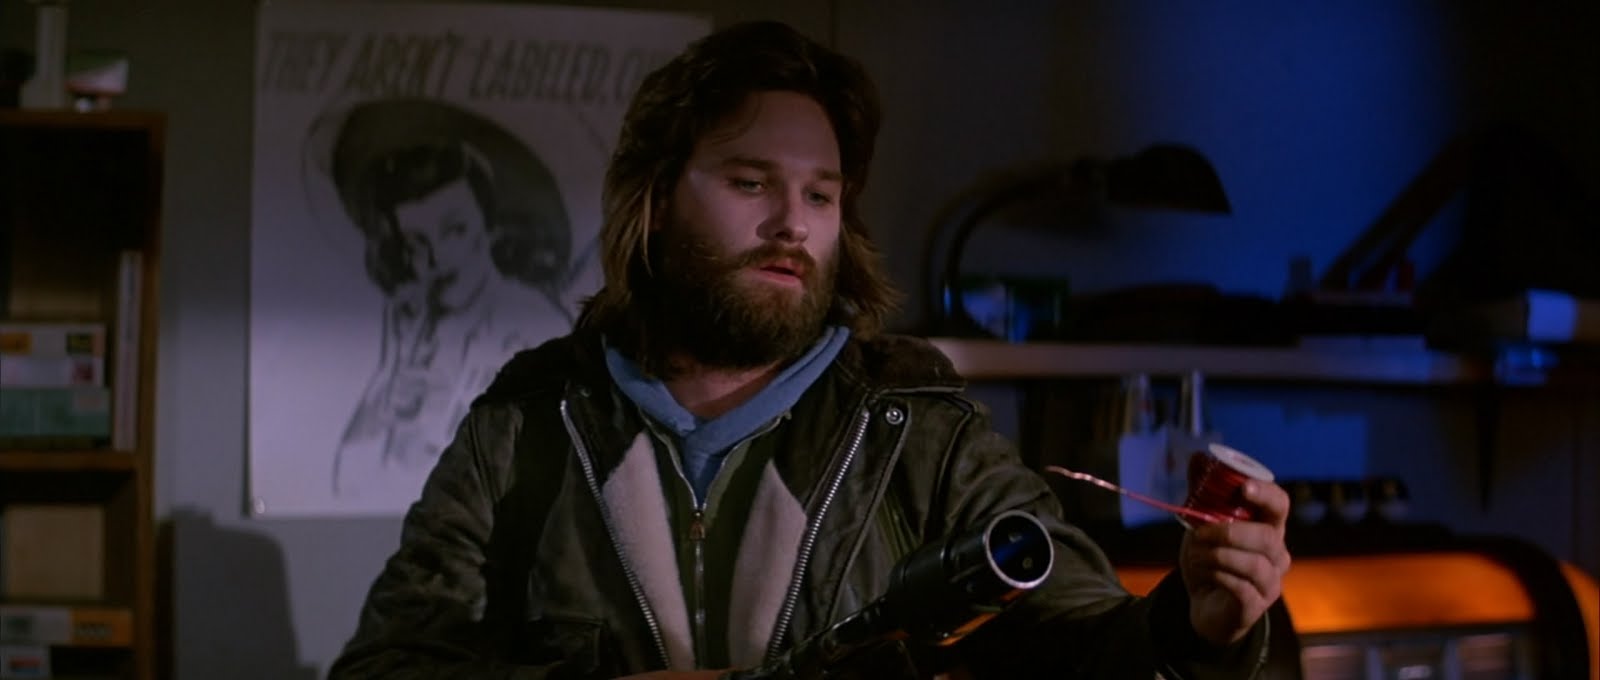 The Thing:
An essential plot point depends on a Norwegian scientist's inability to speak English. 

Every educated Norwegian speaks fluent English.